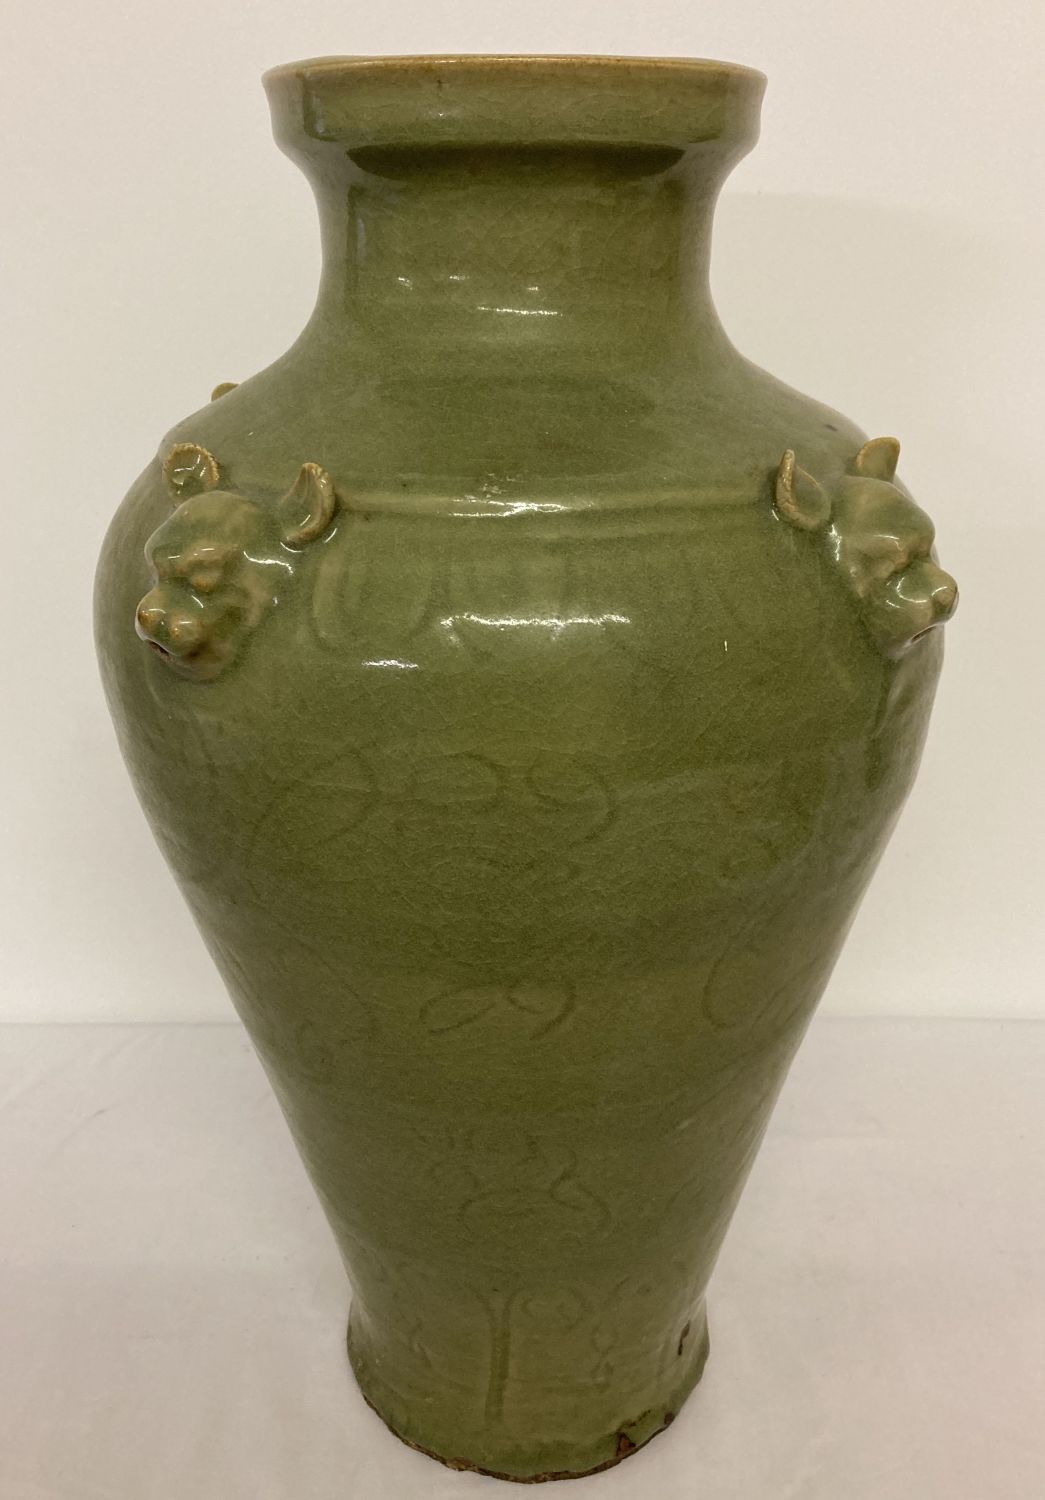 A very large celadon glaze vase of bulbous form, with animal head detail.